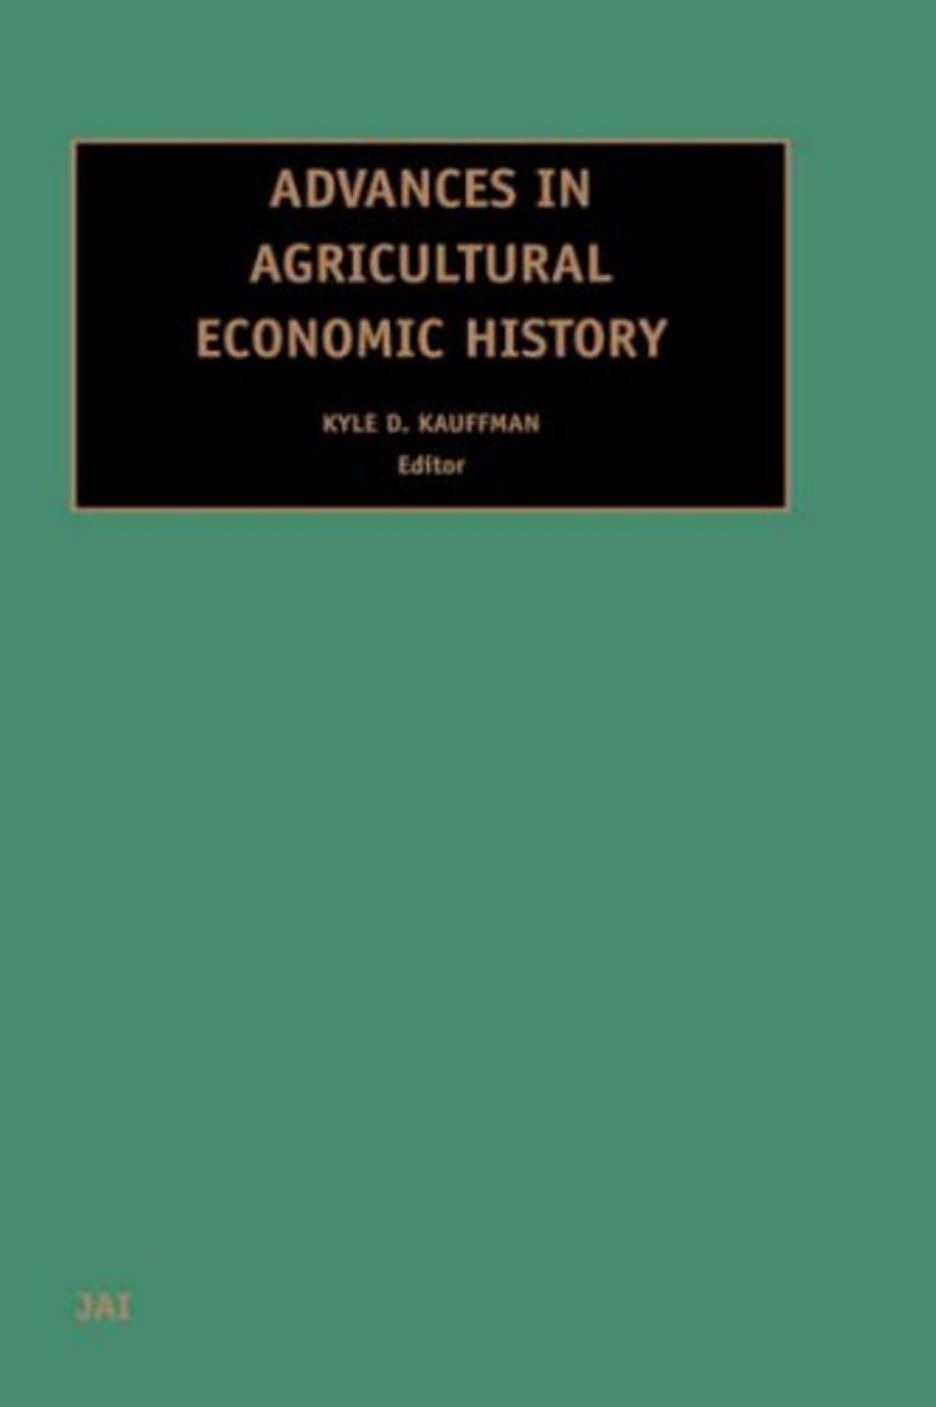 Advances in Agricultural Economic History, 2003